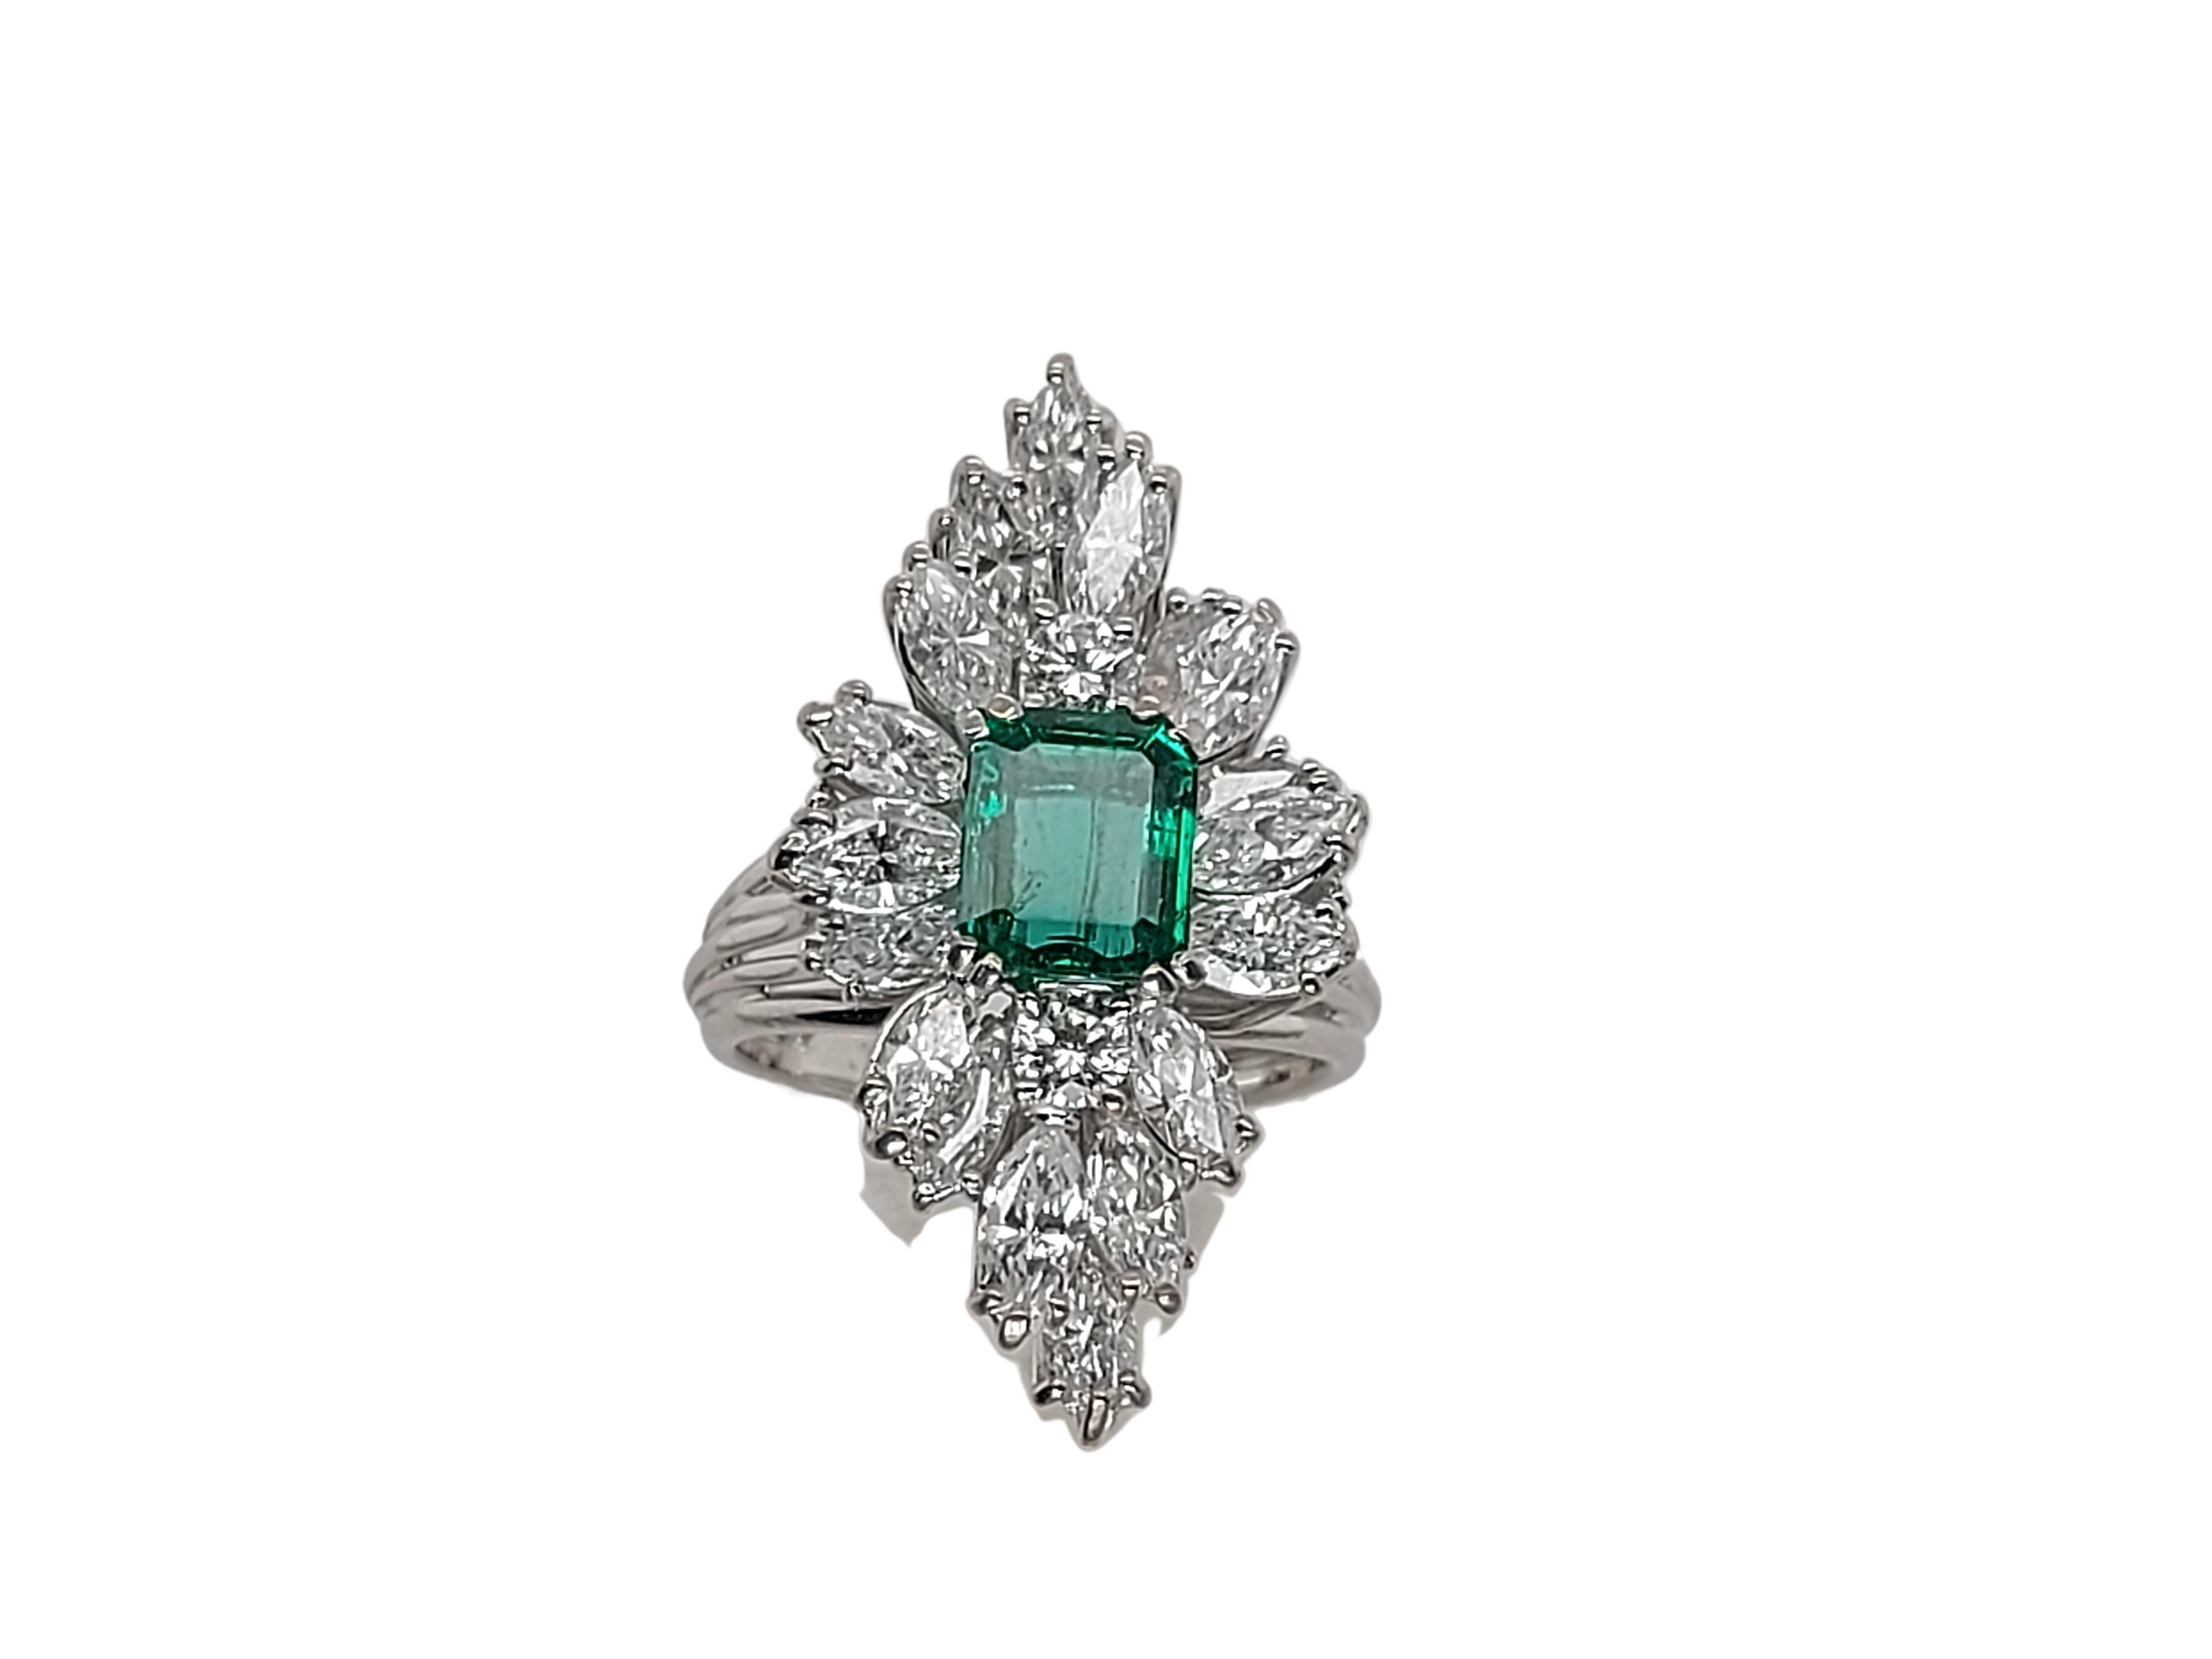 Artisan 18kt White Gold Ring with 1.49 Ct Emerald Stone Surrounded by Diamonds For Sale